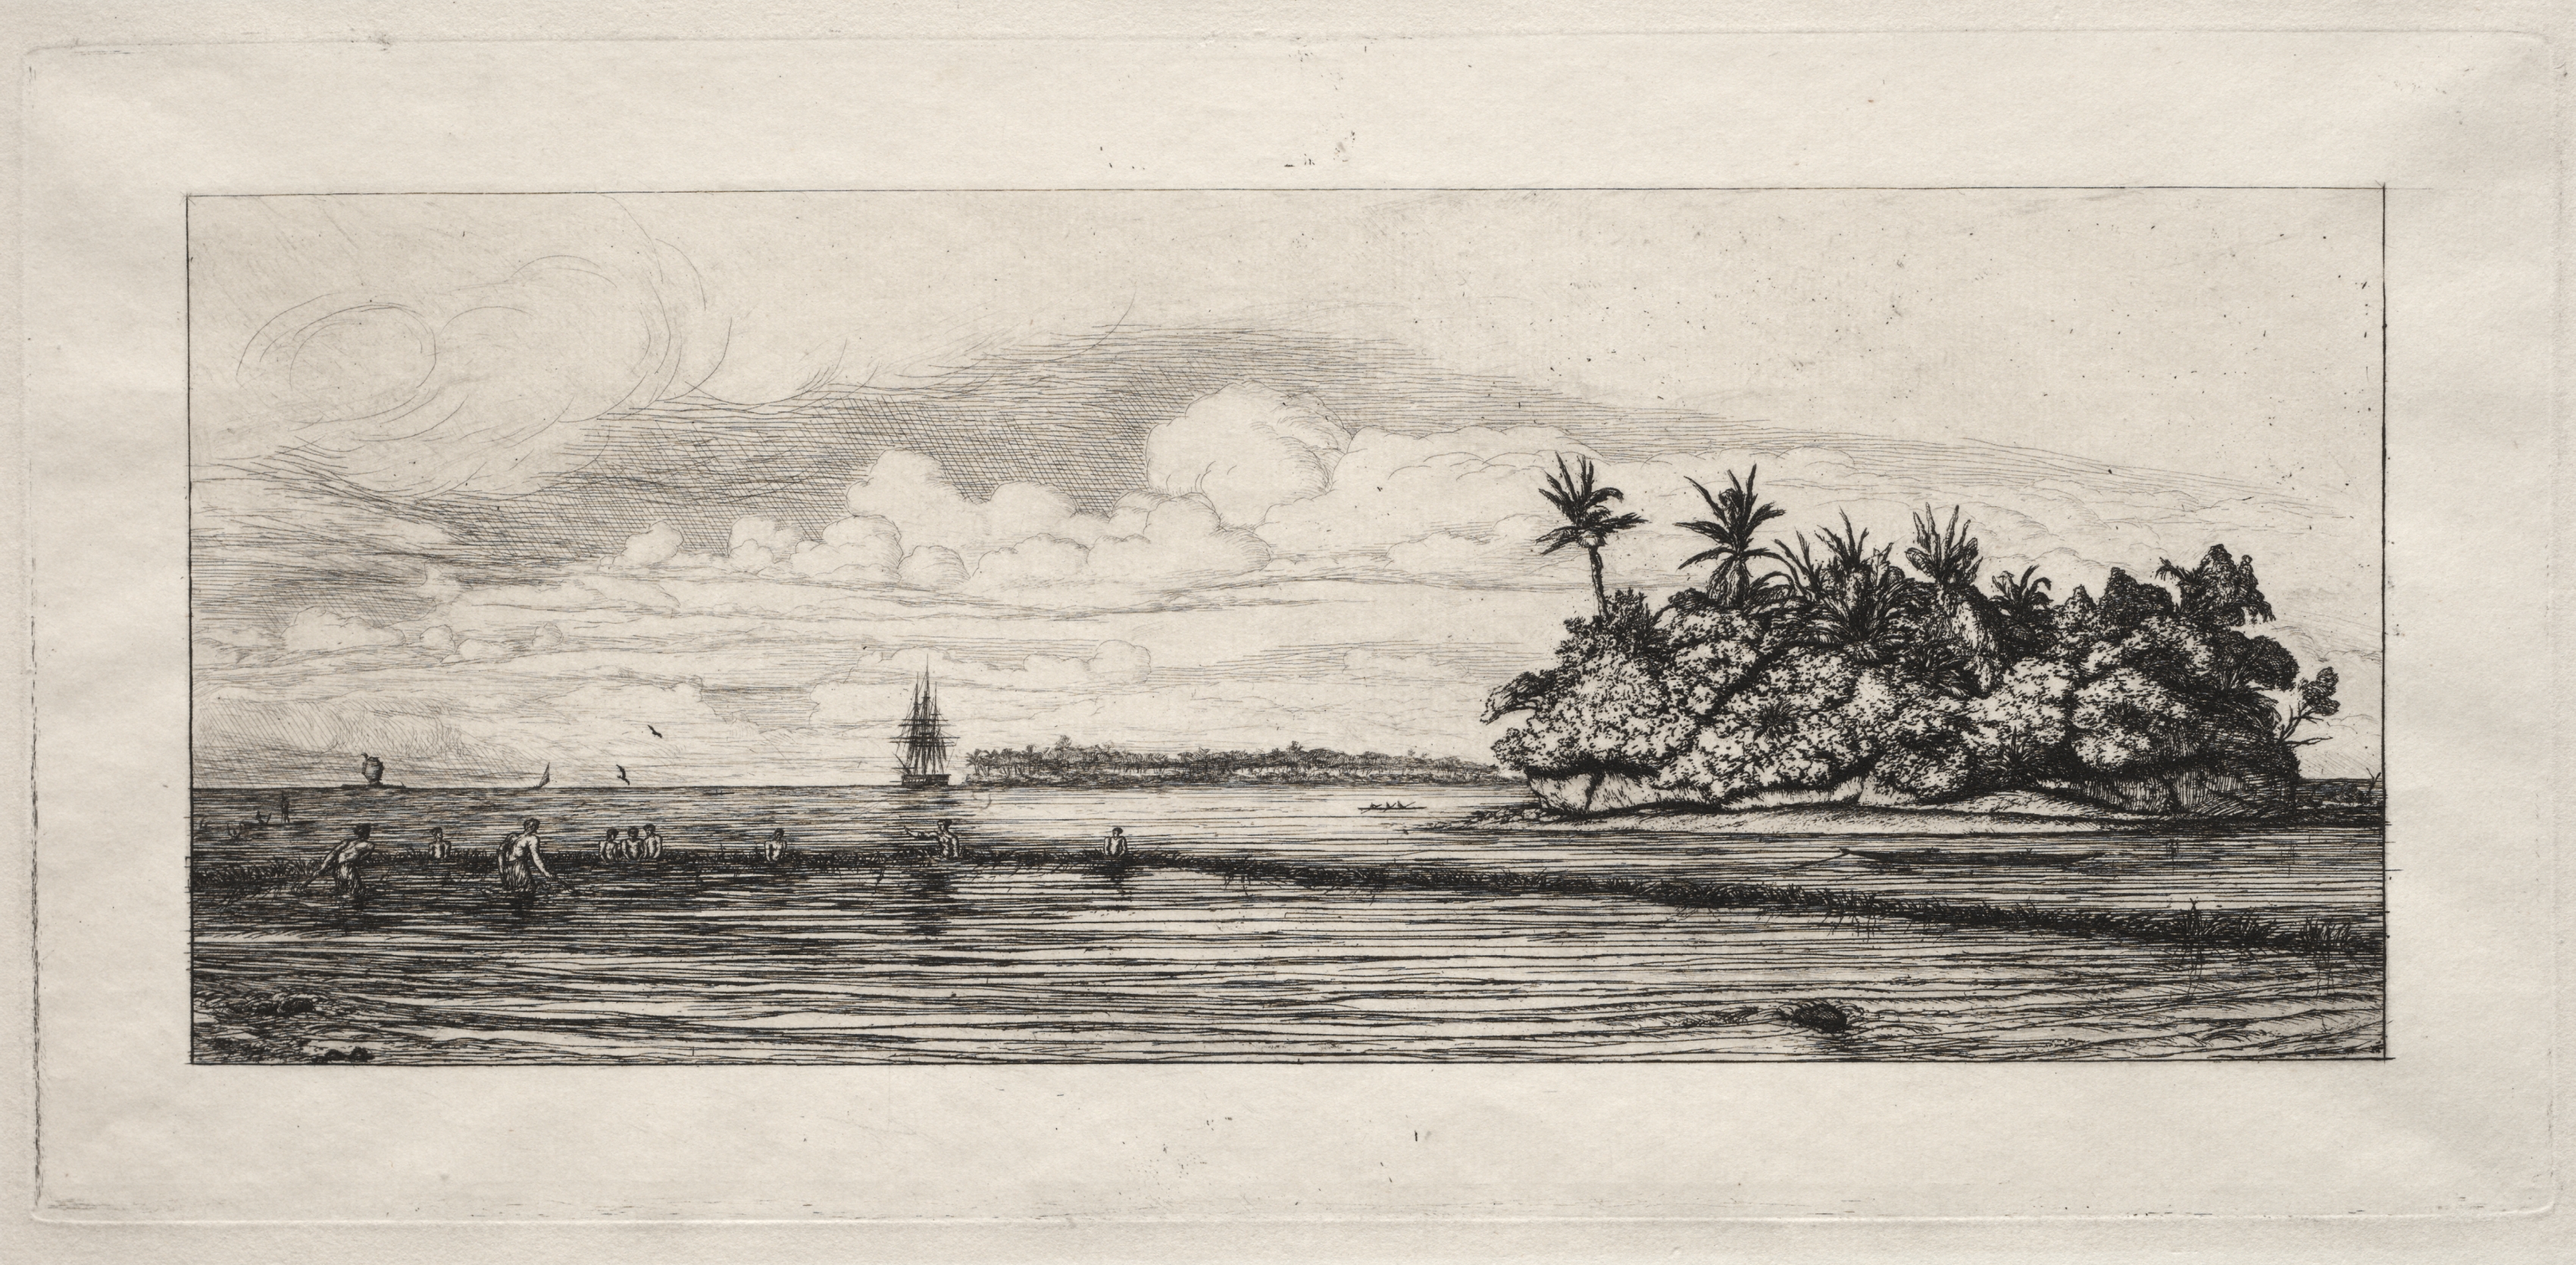 Oceania:  Fishing near Islands with Palms in the Uea or Wallis Group